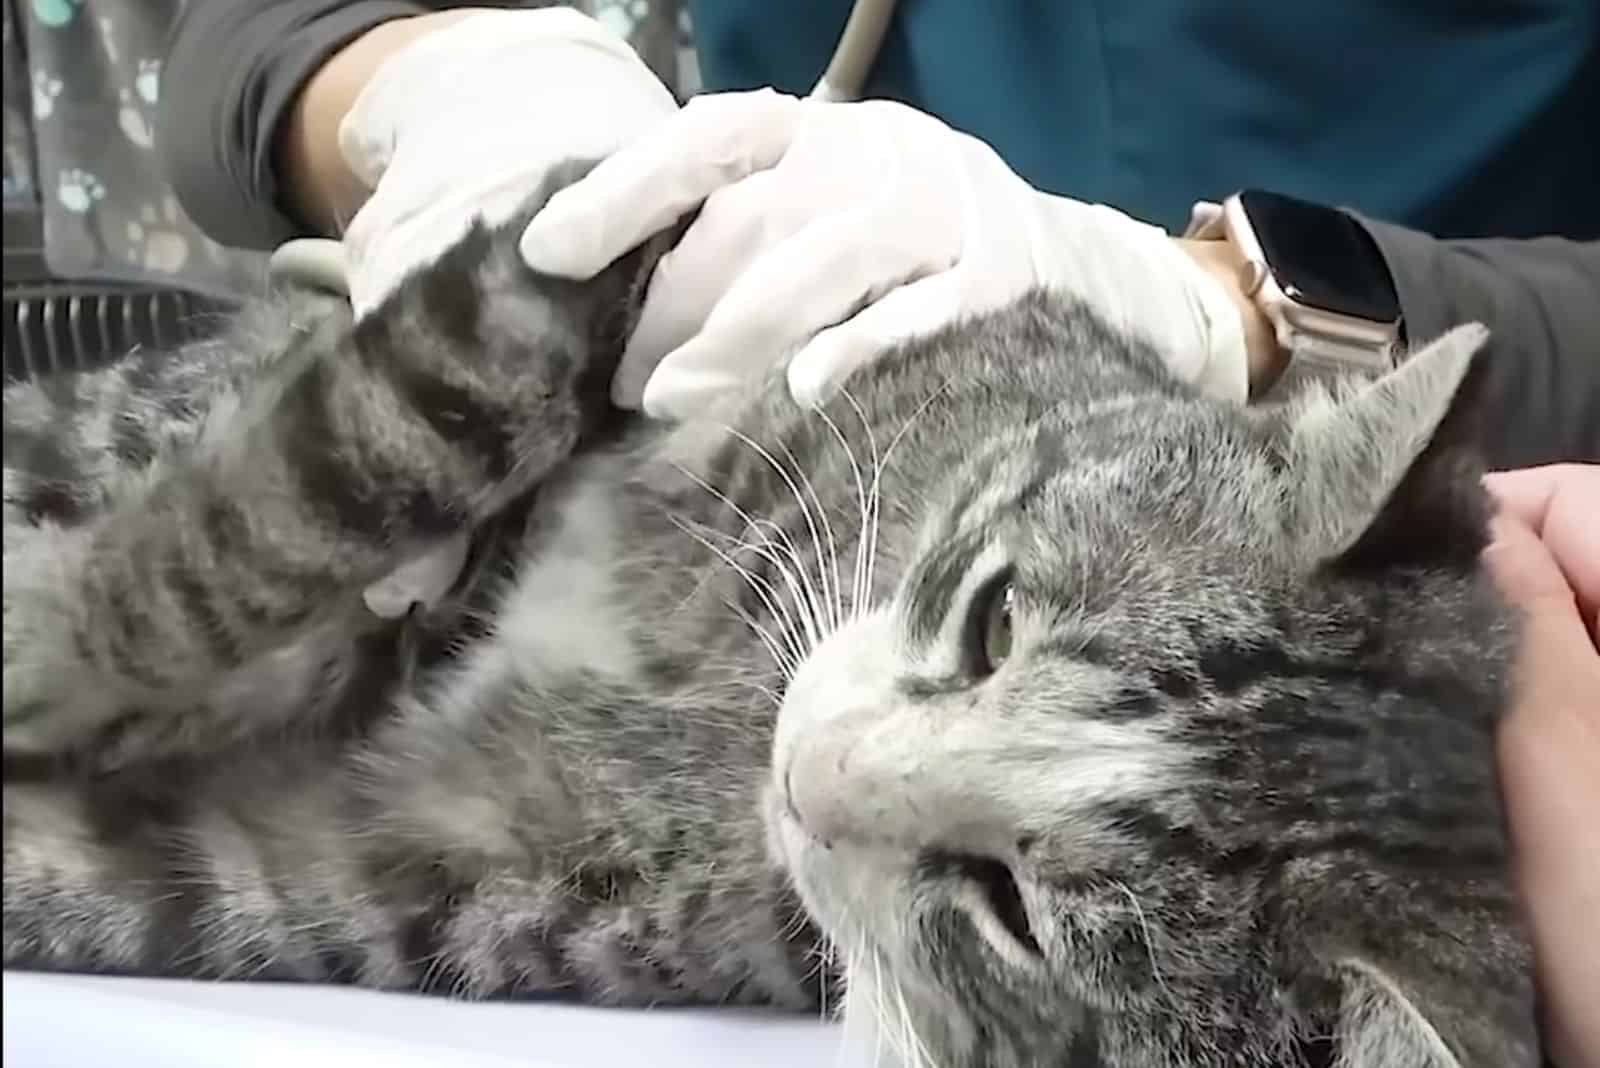 the veterinarian examines the affected cat